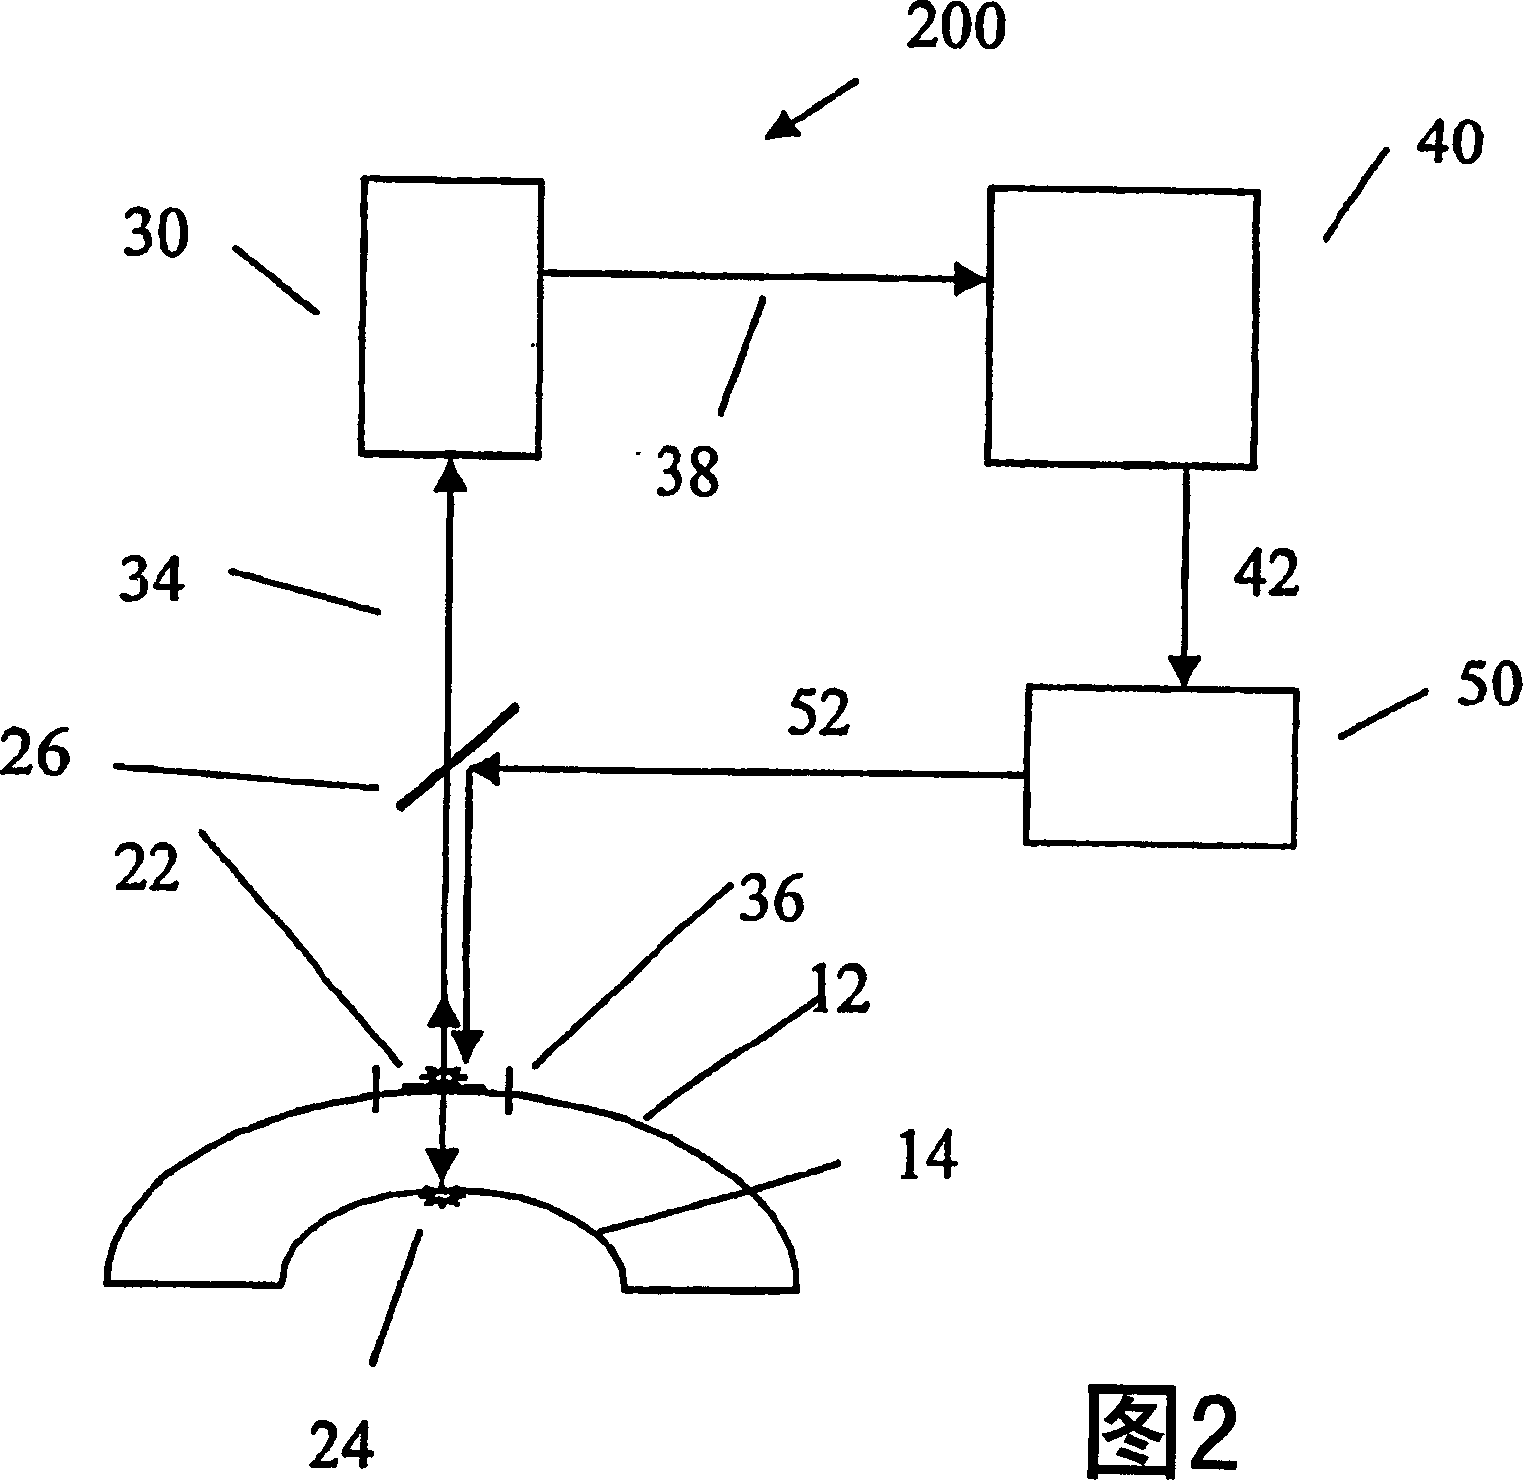 Method and apparatus for eye alignment